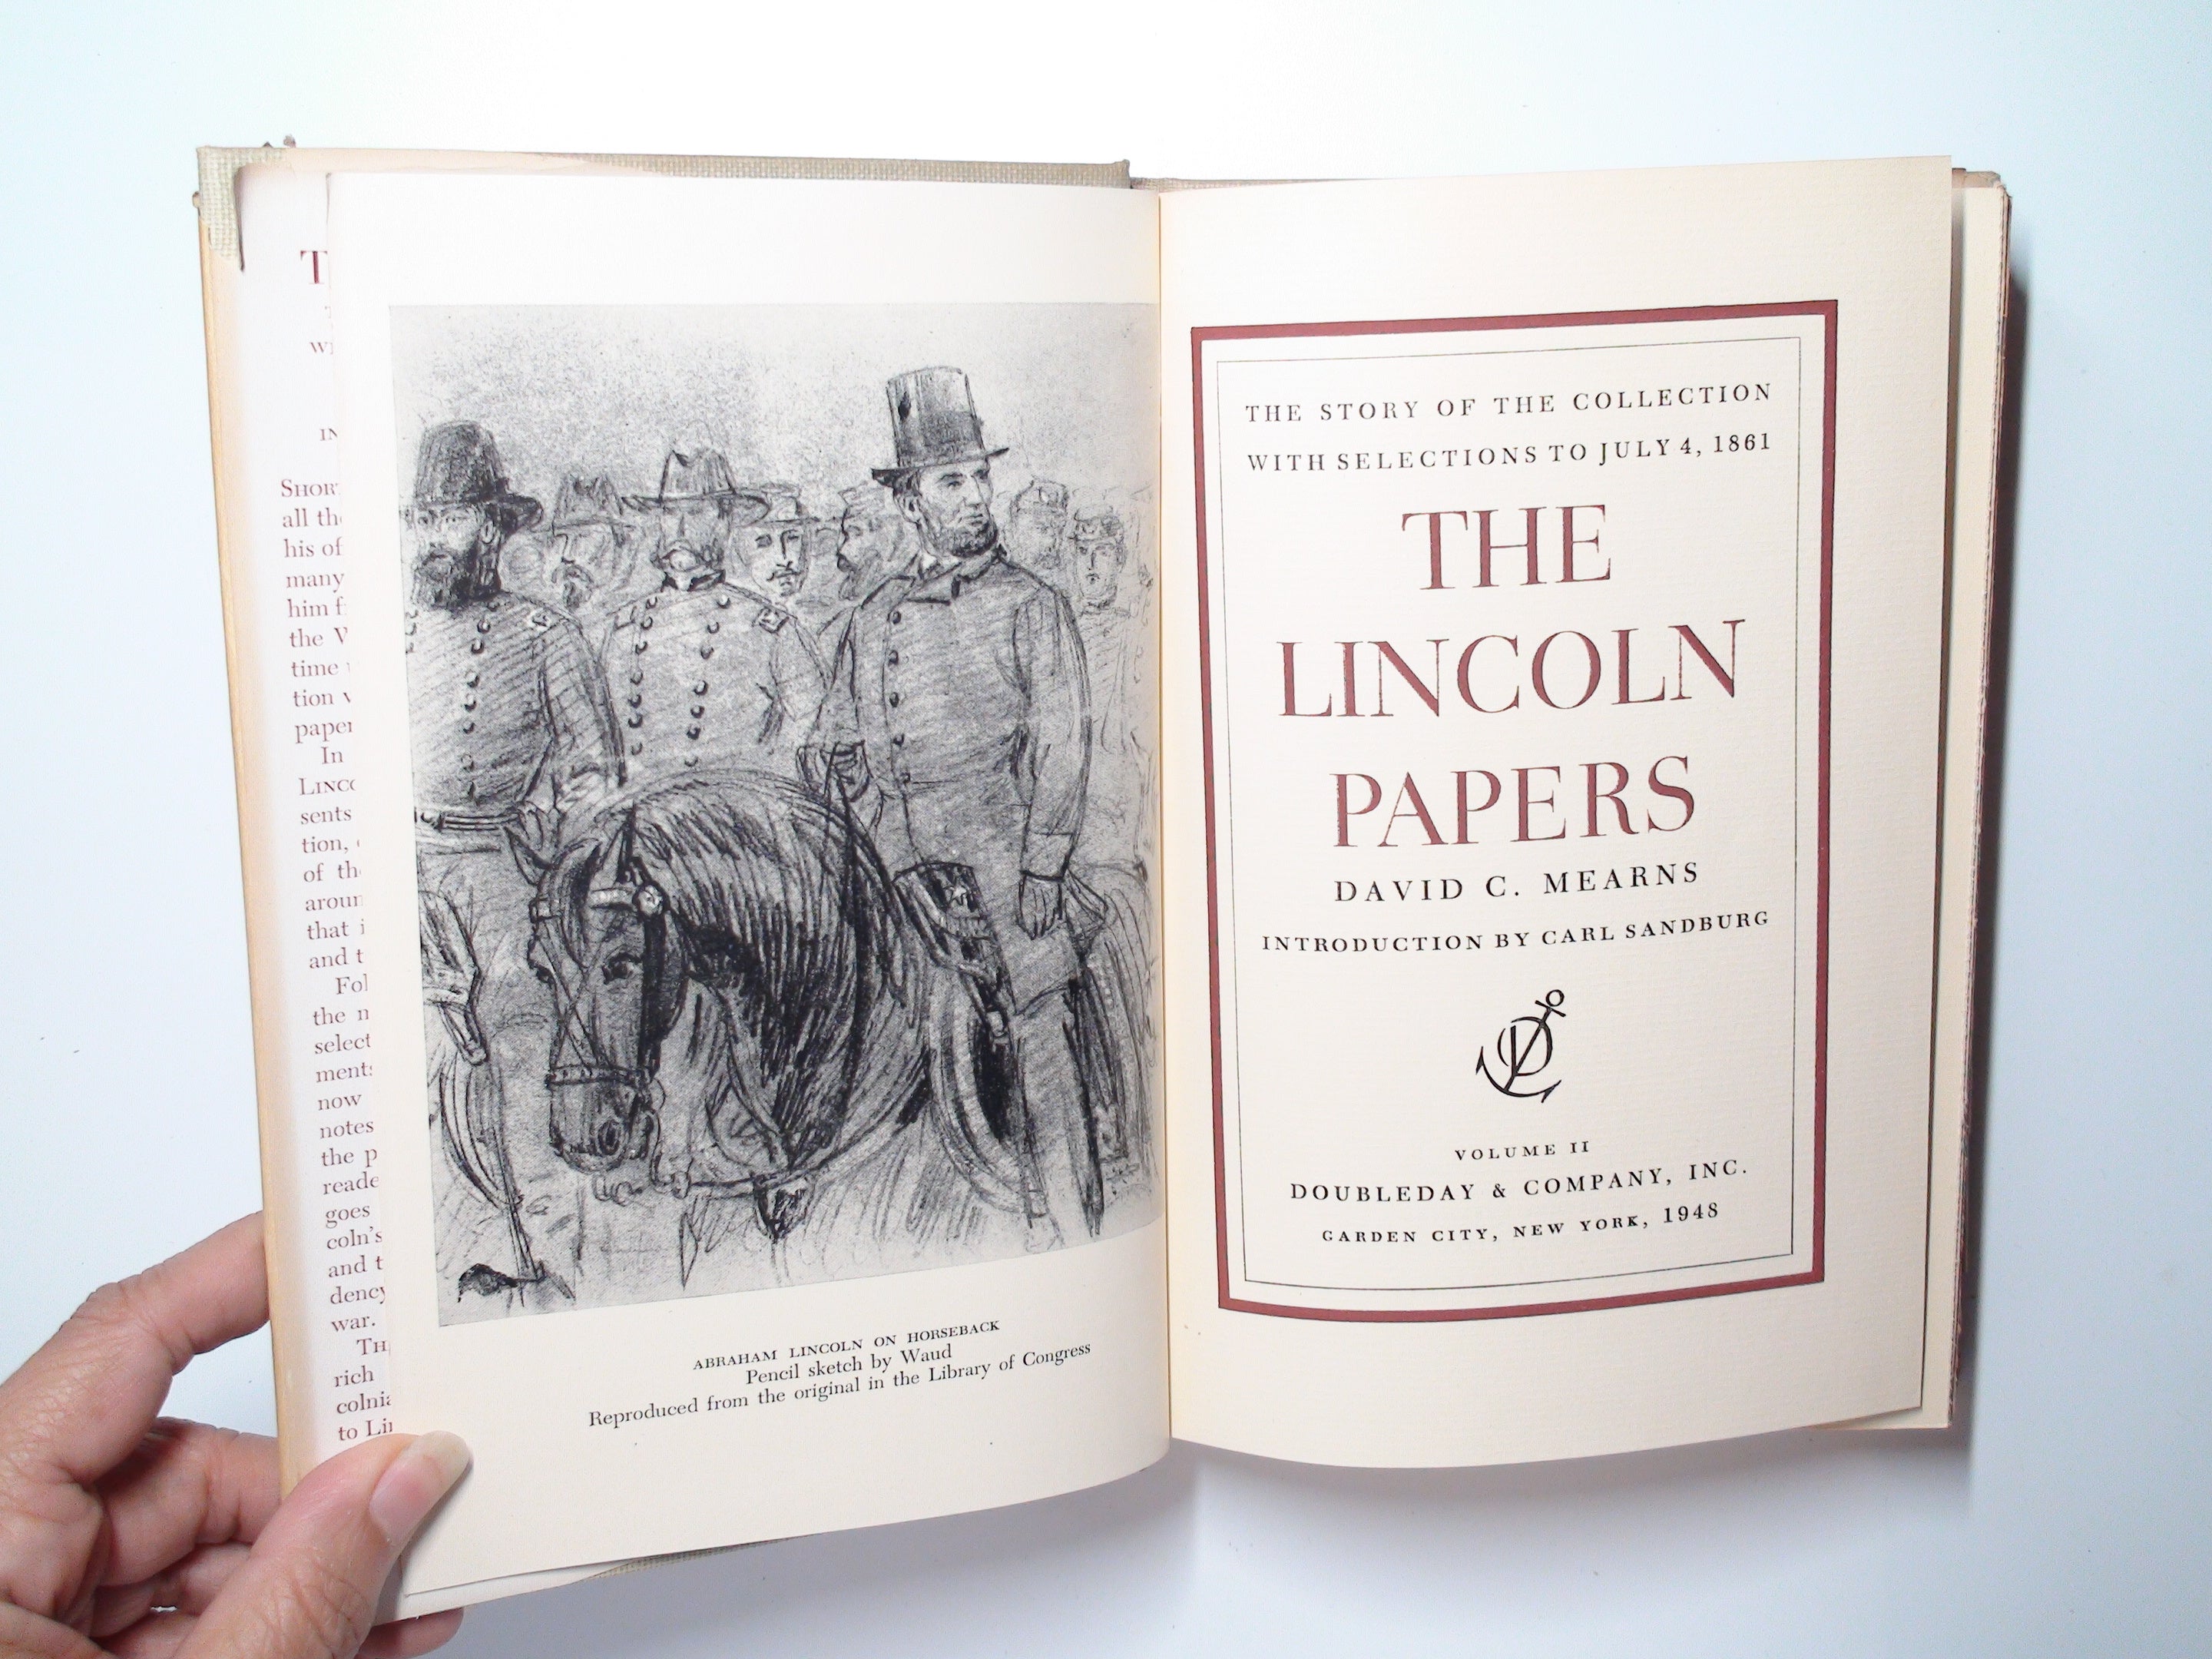 The Lincoln Papers by David C. Mearns, 2 Vols, with D/J, 1st Edition, 1948